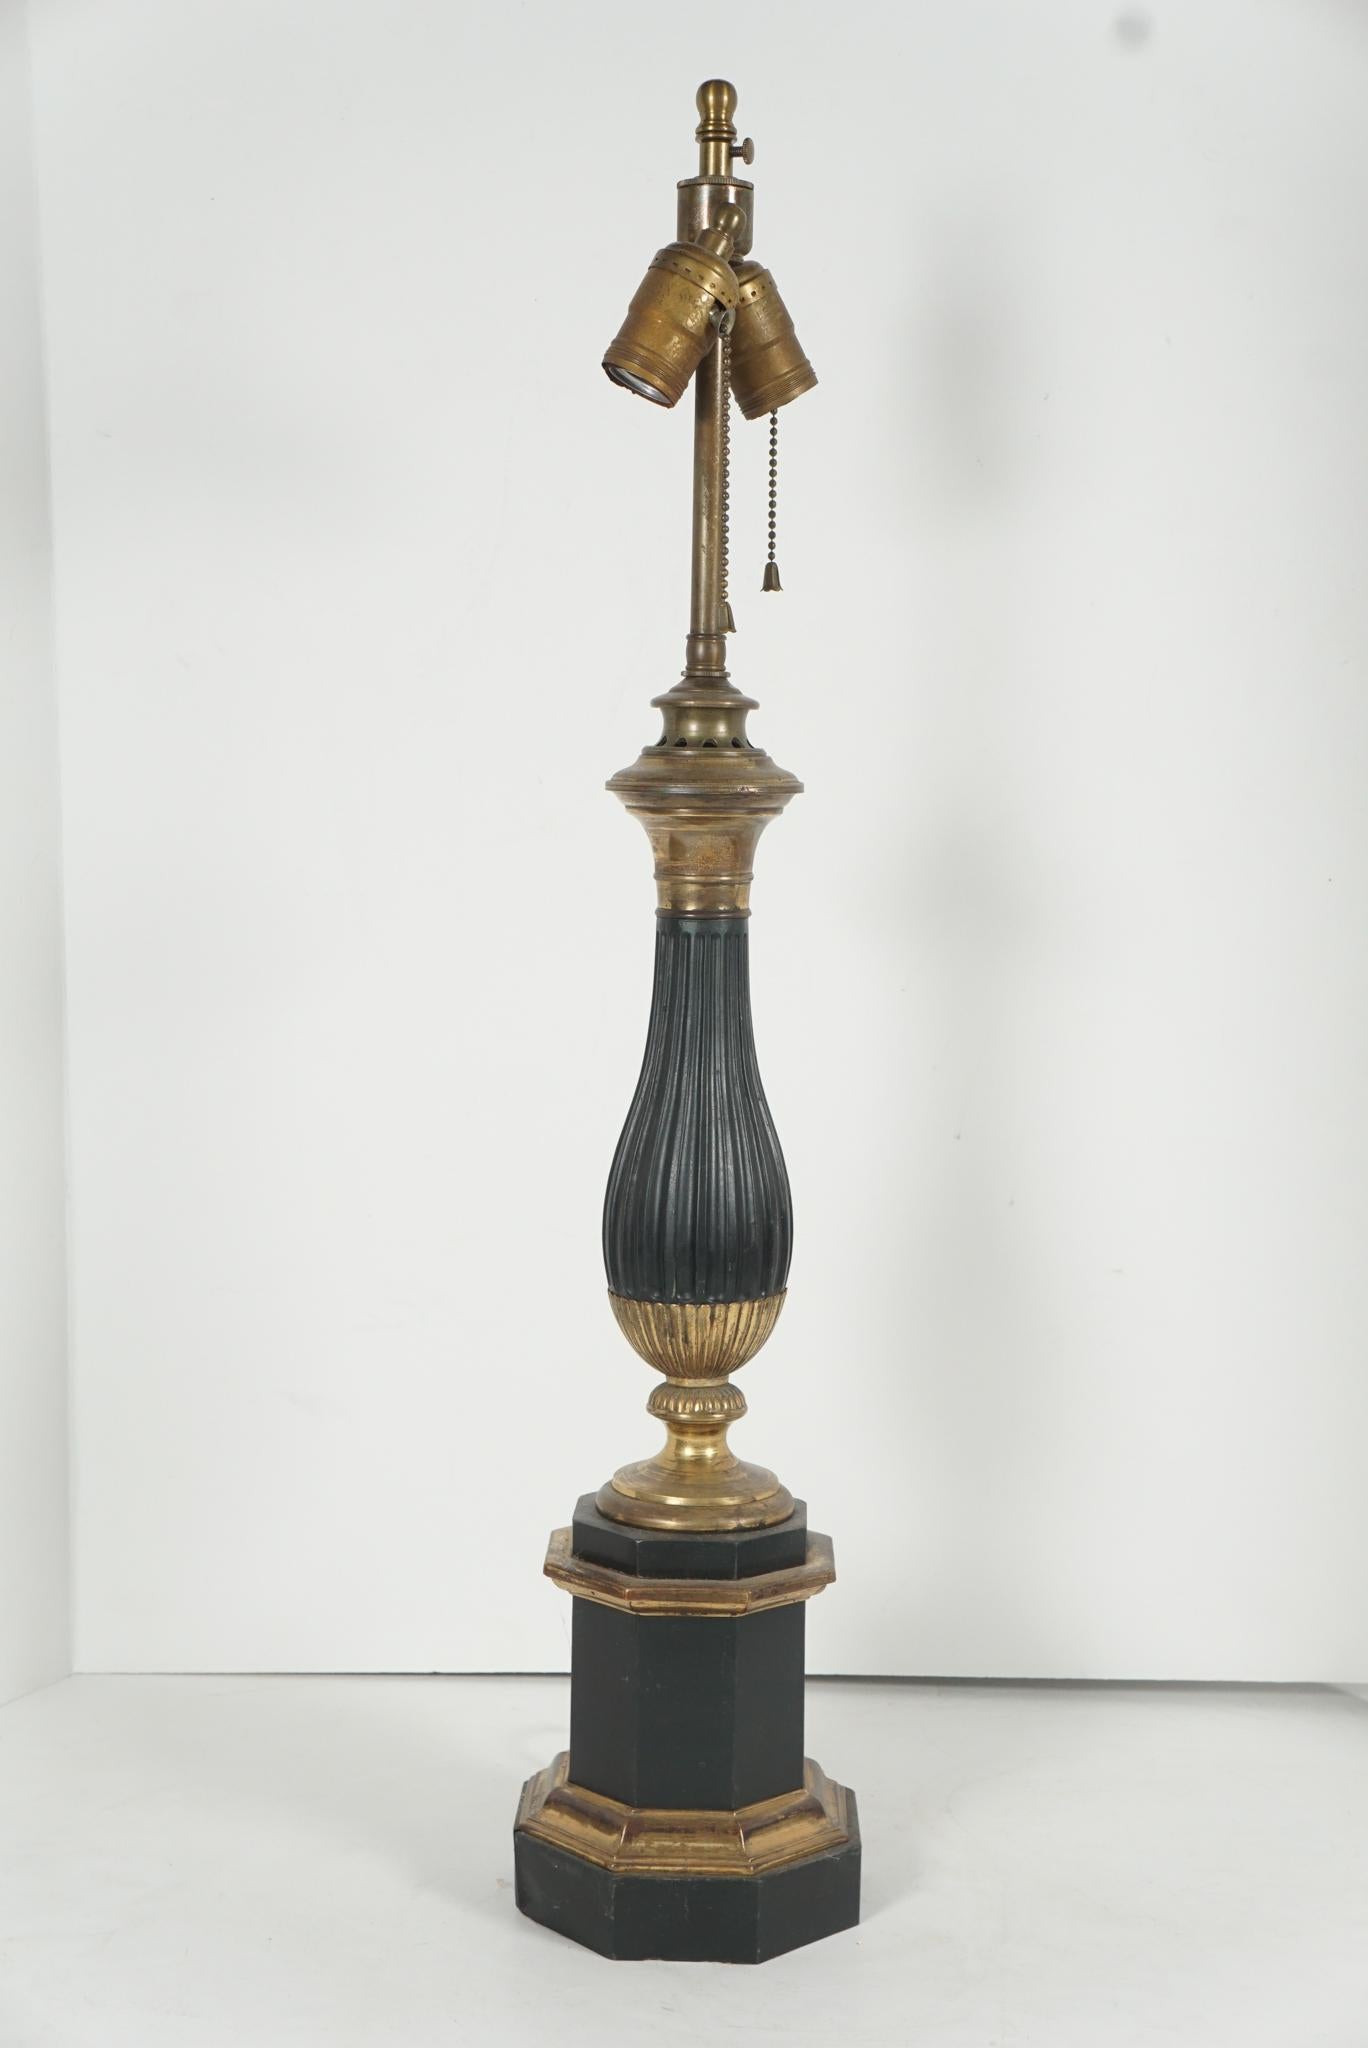 This very nice carcel lamp now converted to electricity comes from the estate and Paul and Bunny Mellon and formed part of the decorations of their home Oak Springs Farm. The lamp, once illuminated by a burner which has been replaced with a